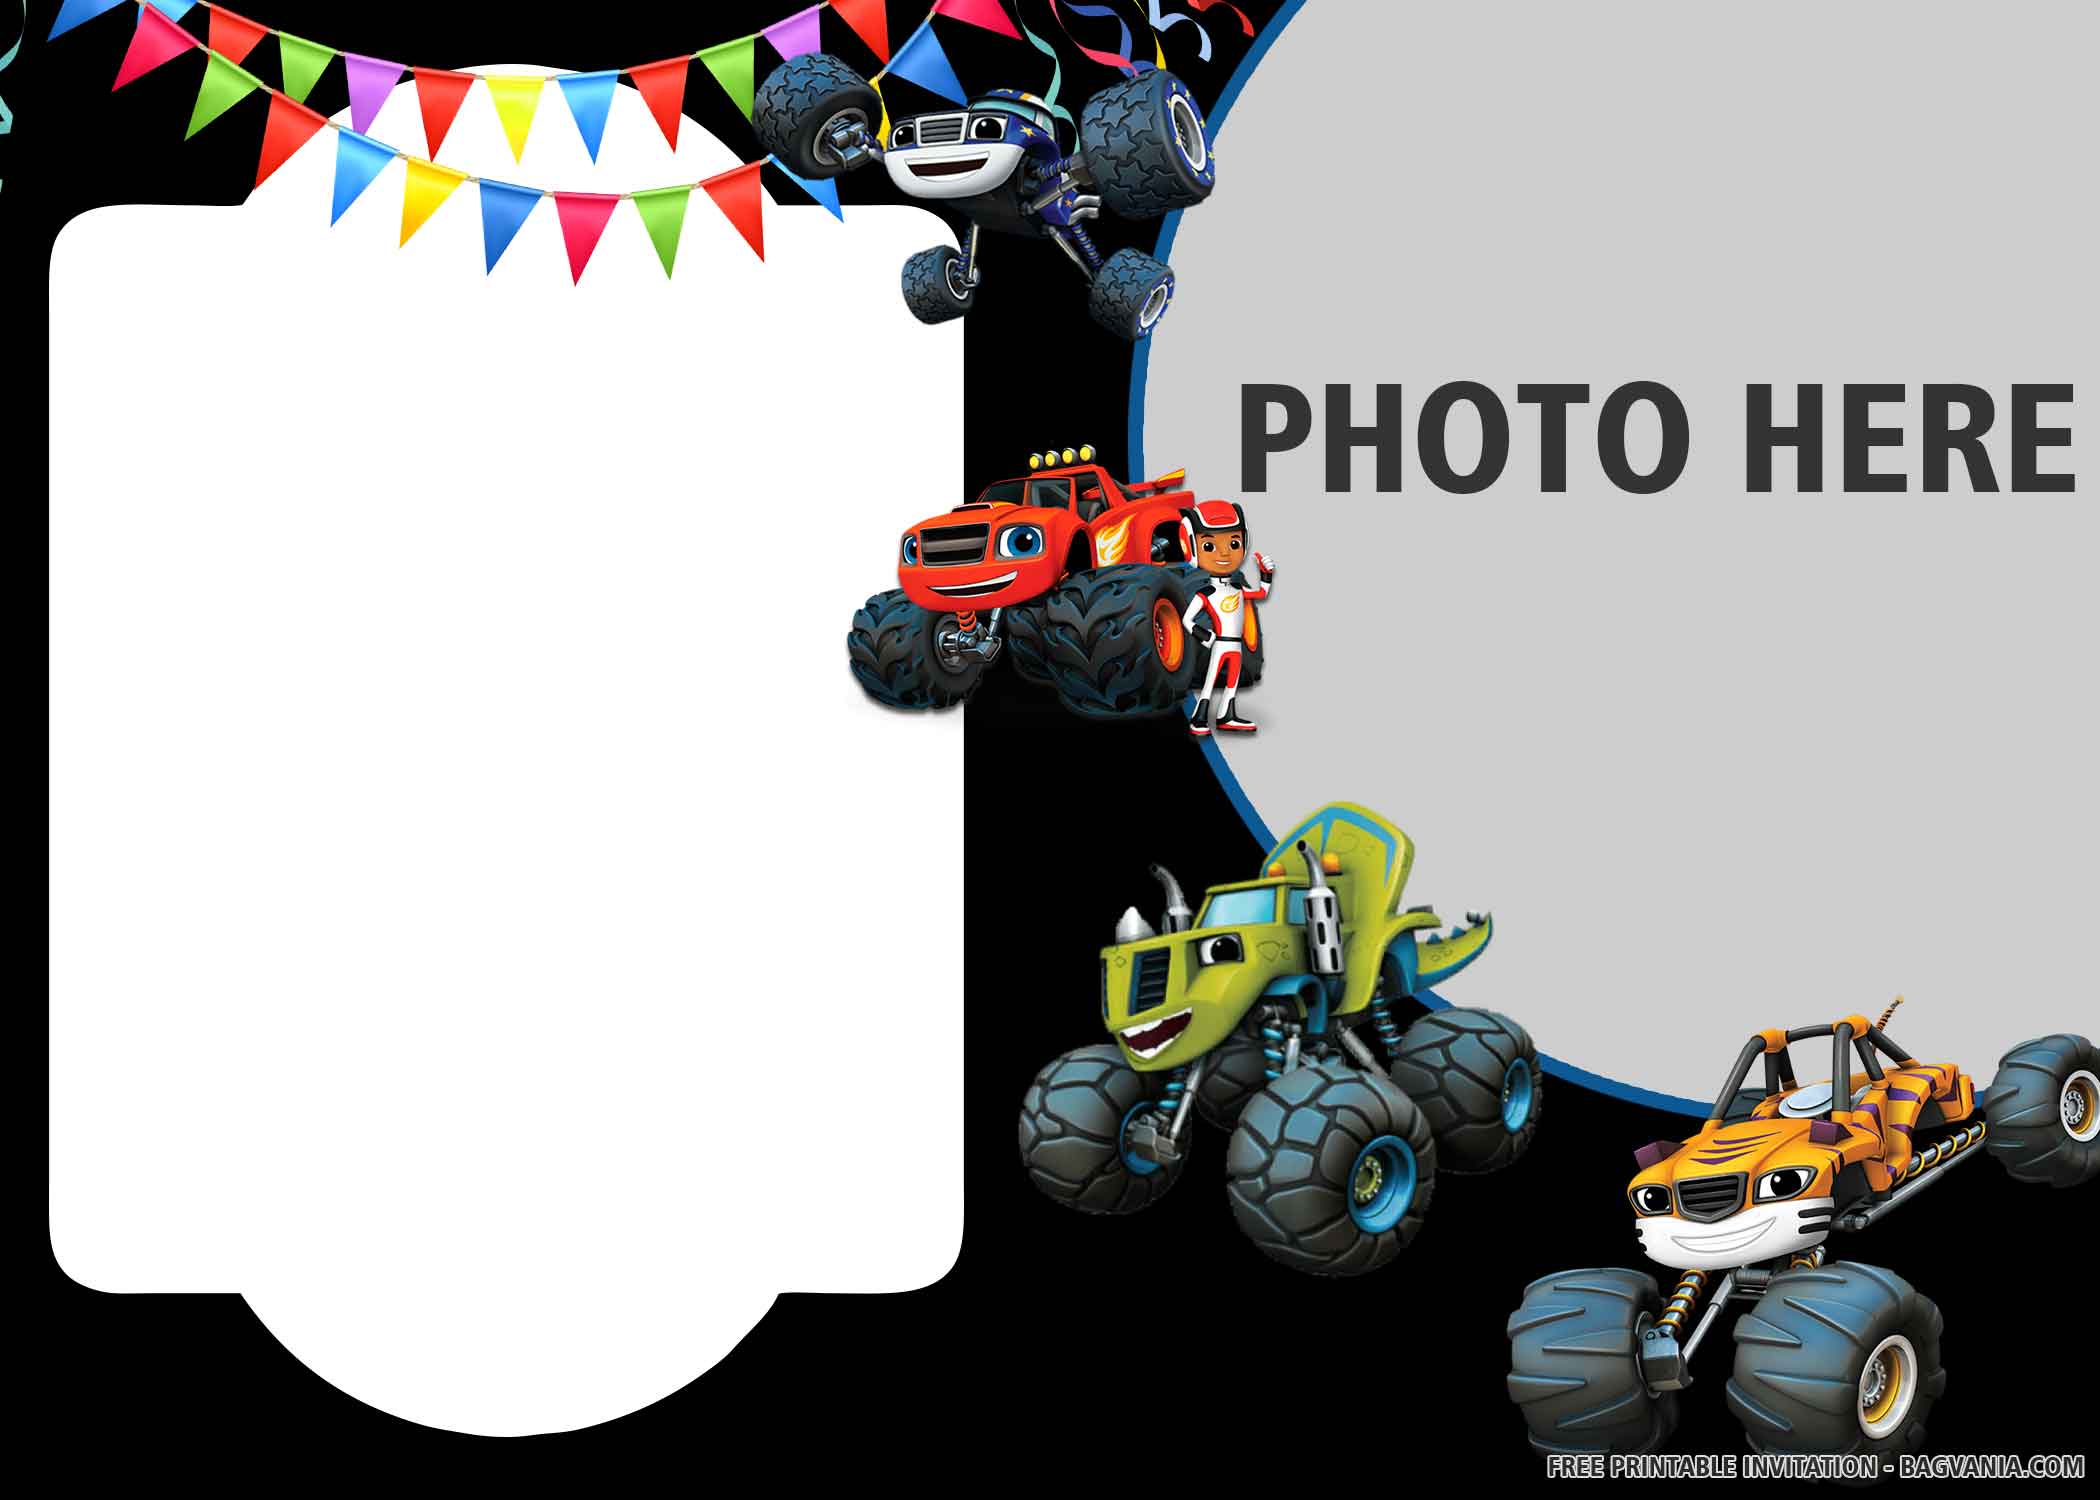 1.	FREE Monster Cars in Random with Photo, Ribbons and Black Background